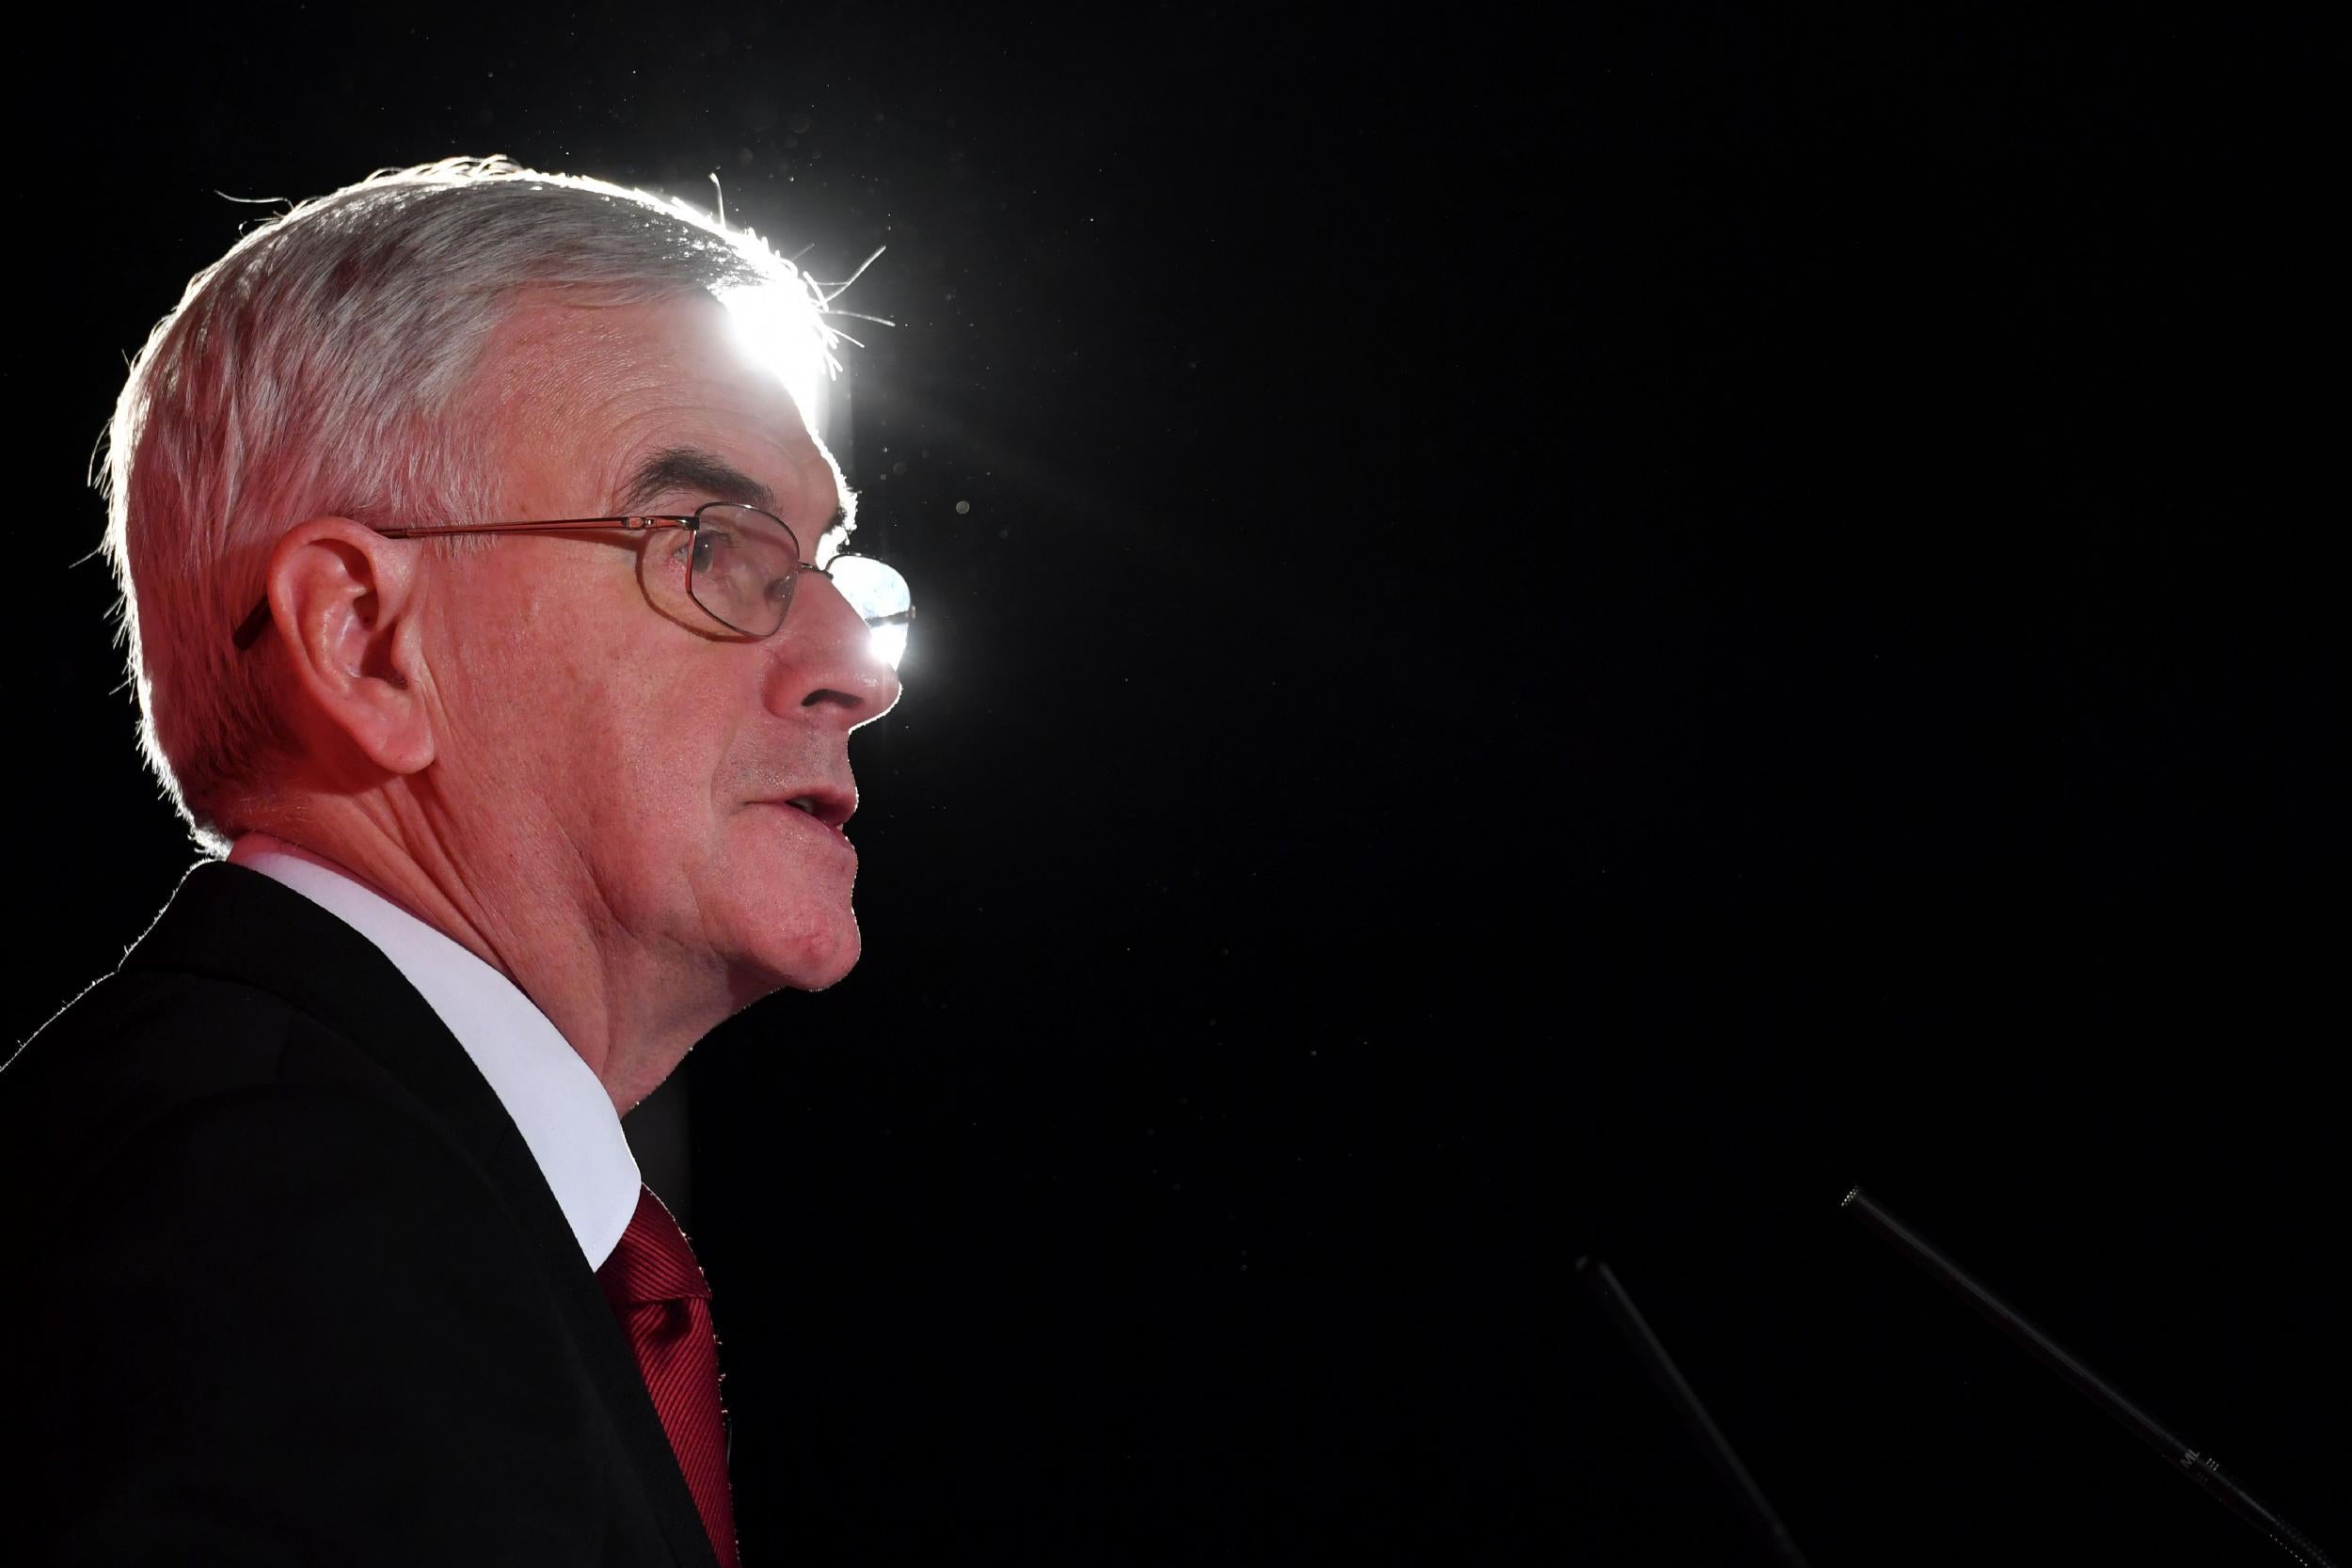 The Shadow Chancellor called the Prime Minister’s meeting with the US President a ‘desperate’ attempt to secure a trade deal